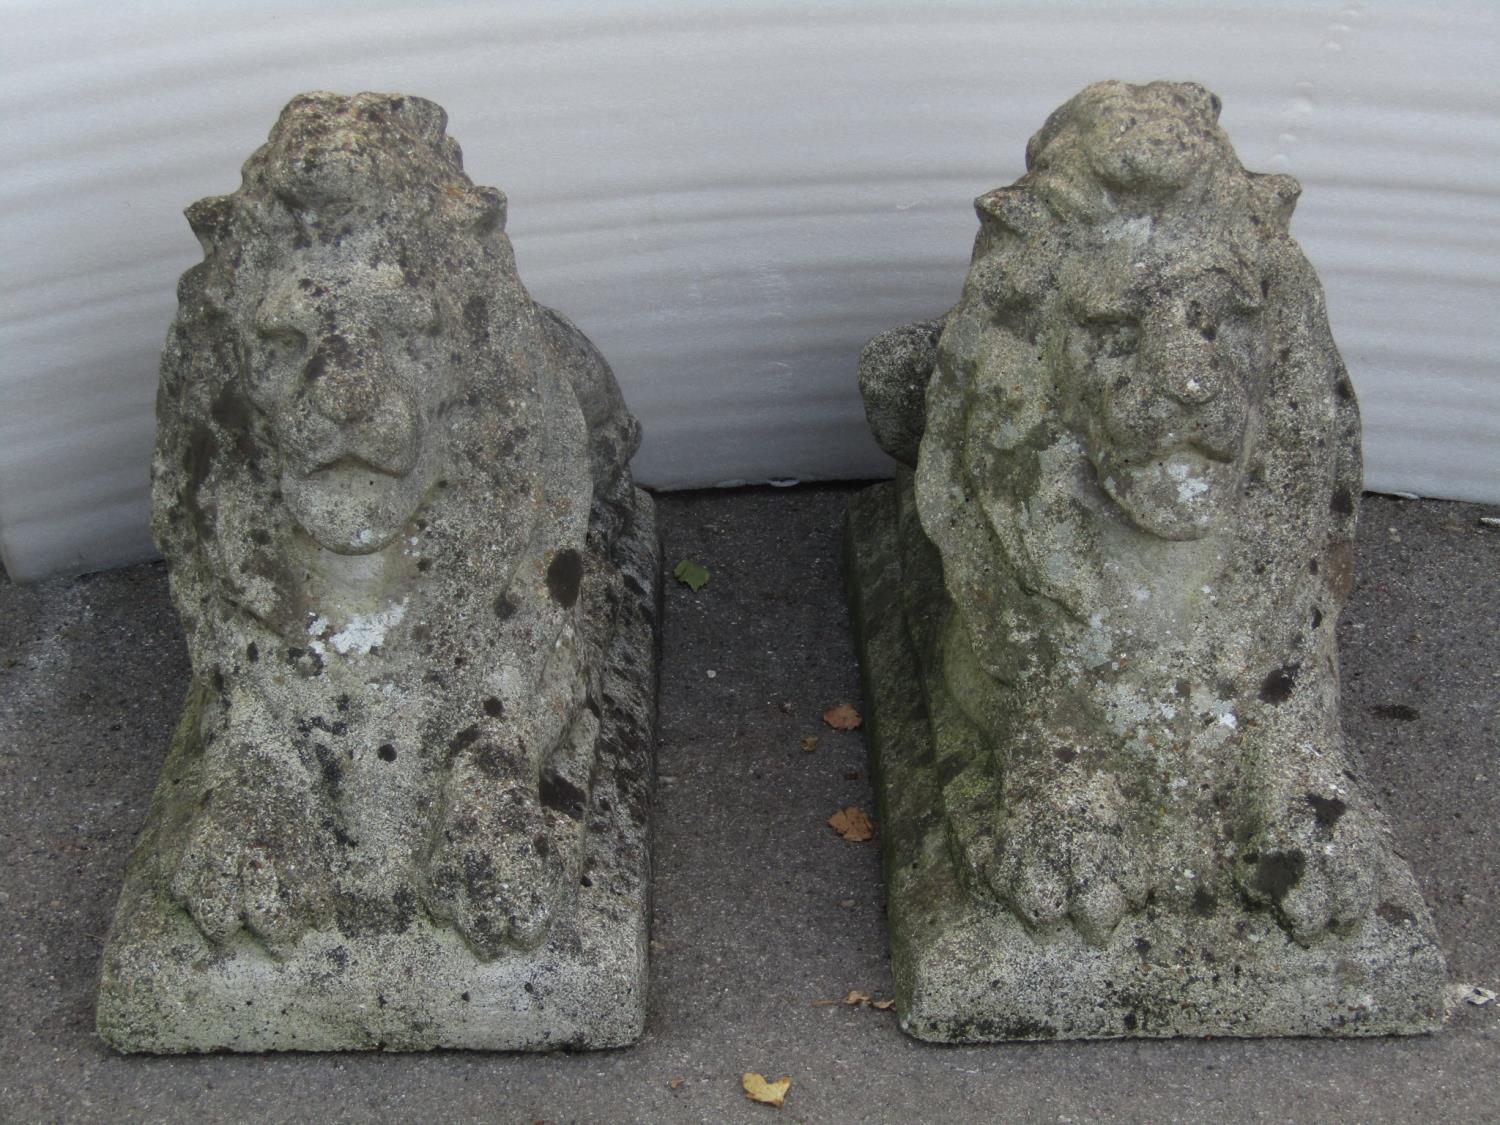 A pair of weathered hollow cast composition stone recumbent regal lions with defined features, 70 cm